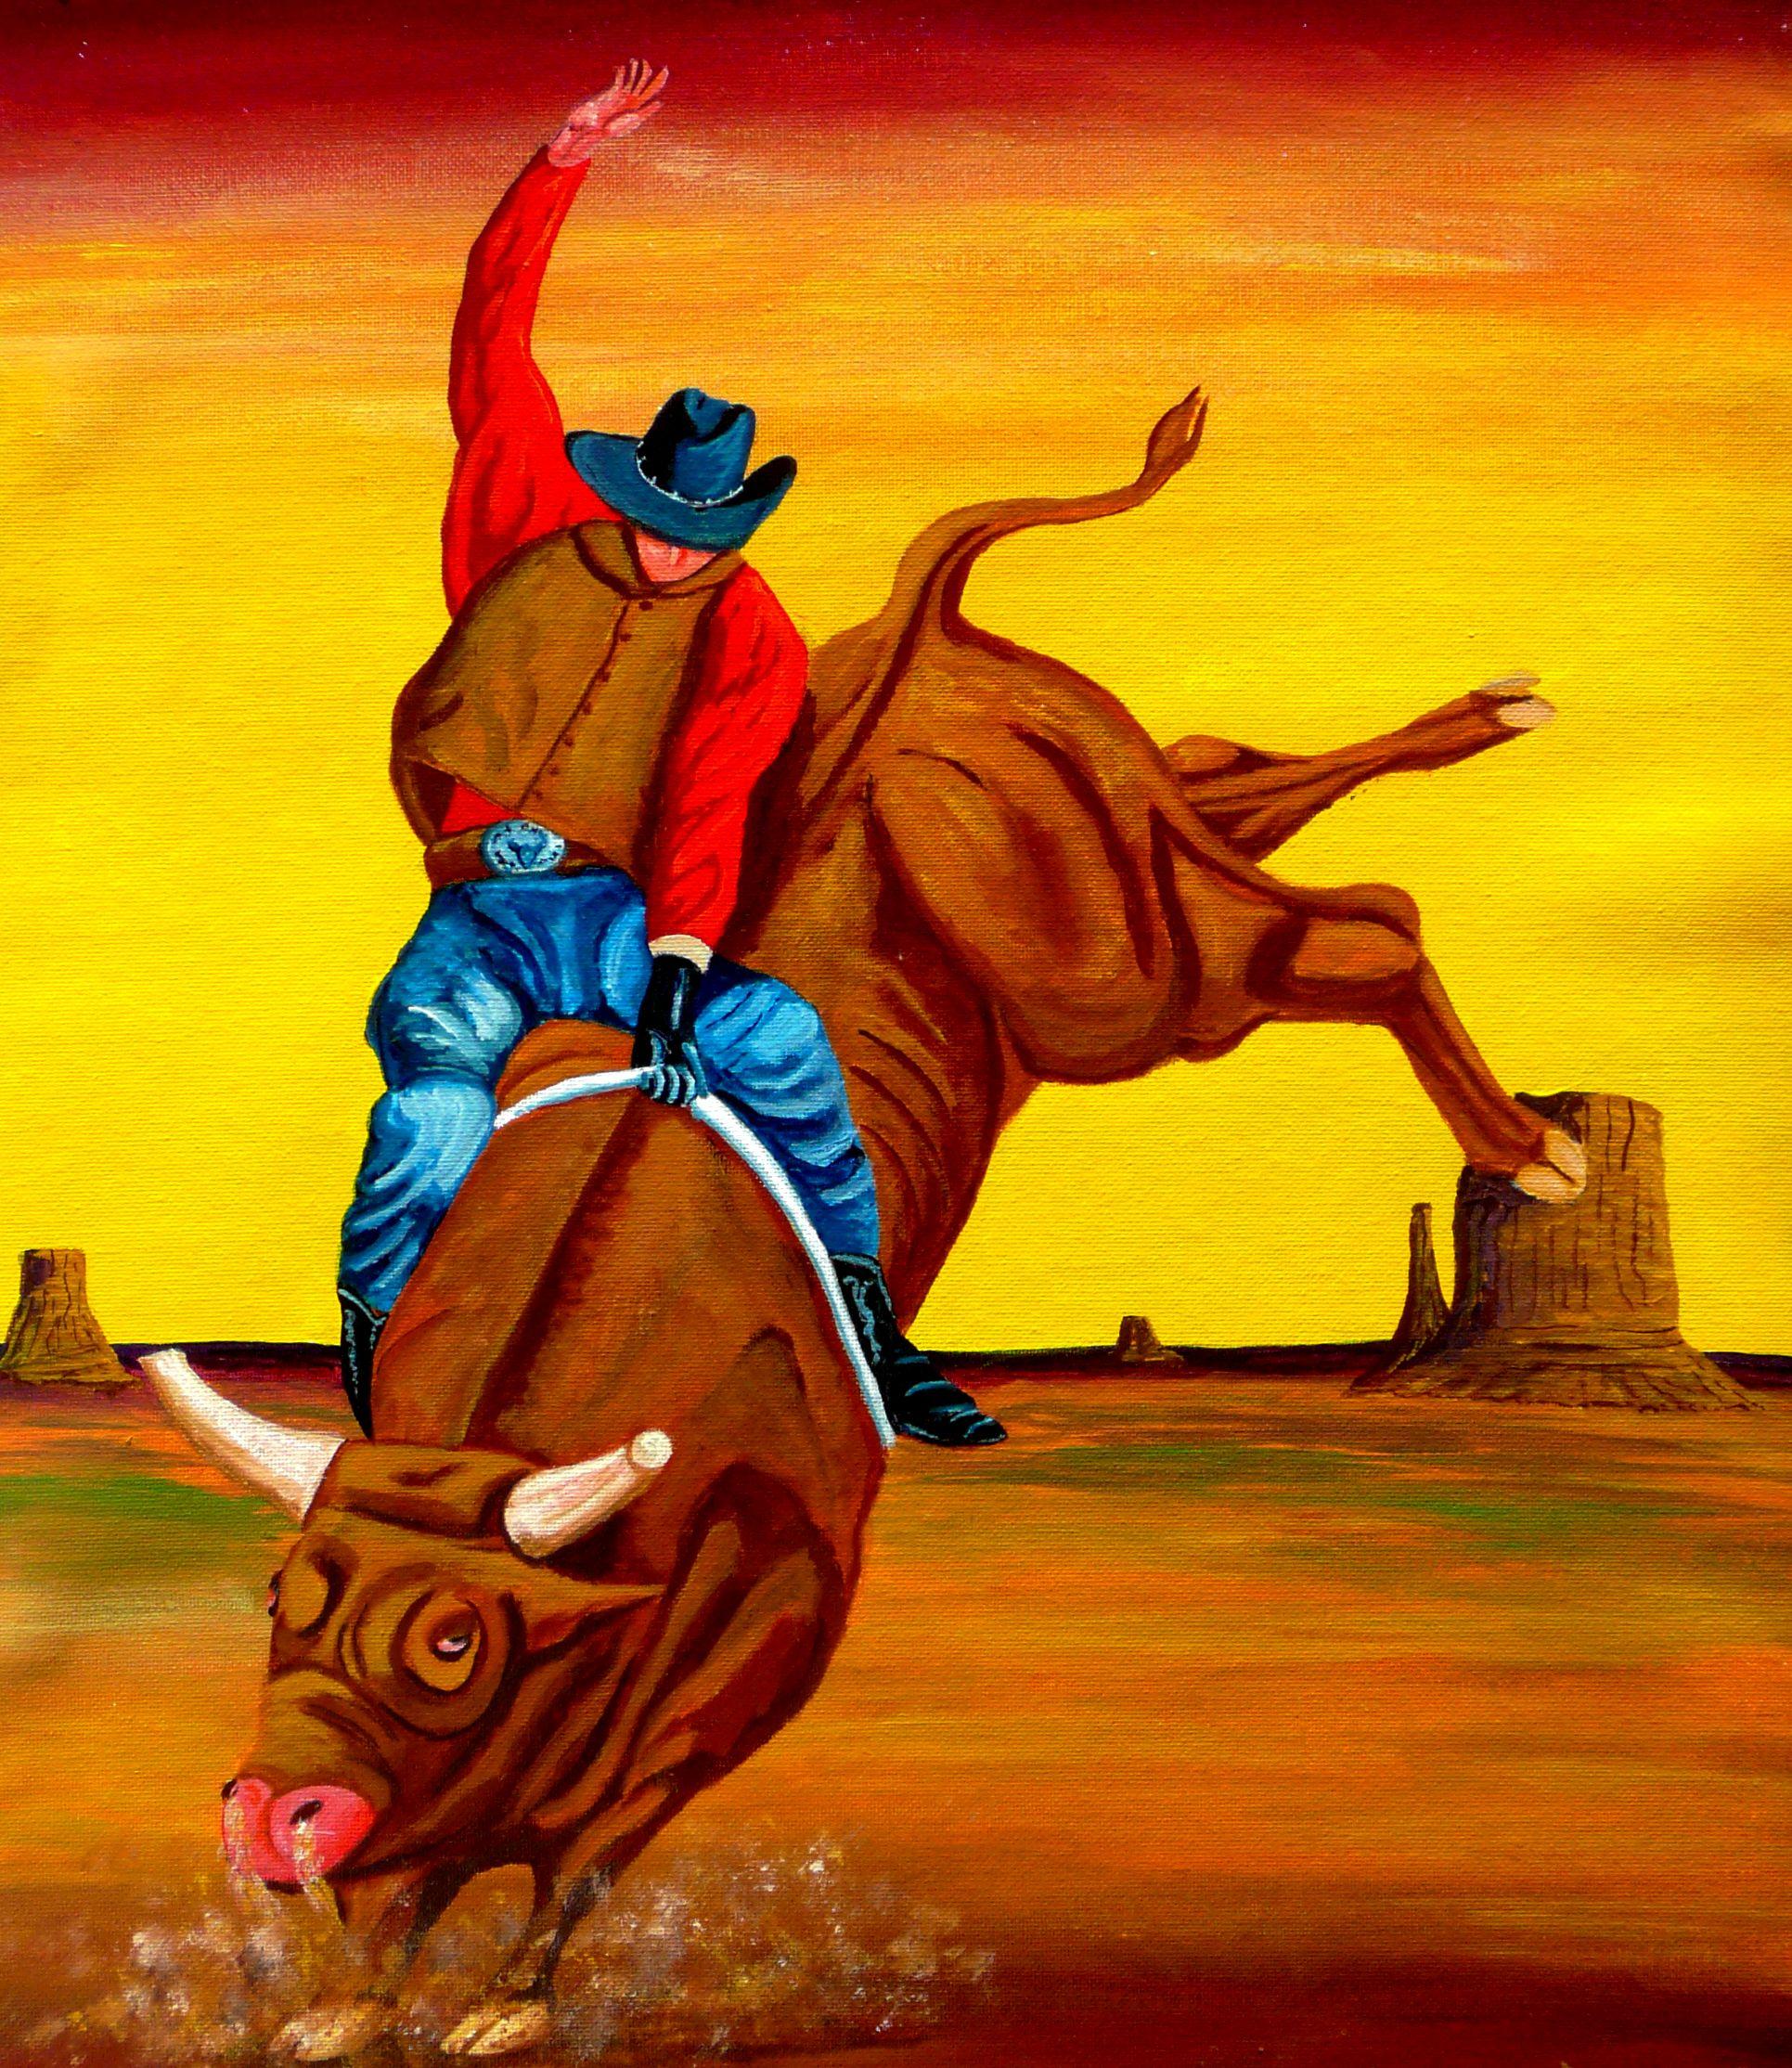 8 Seconds may seem like a very short time to you but, when you are straddling an 800 pound bull and he doesn't want you there, it can seem like an eternity. This western themed painting is dedicated to those fun loving cowboys in the bull riding